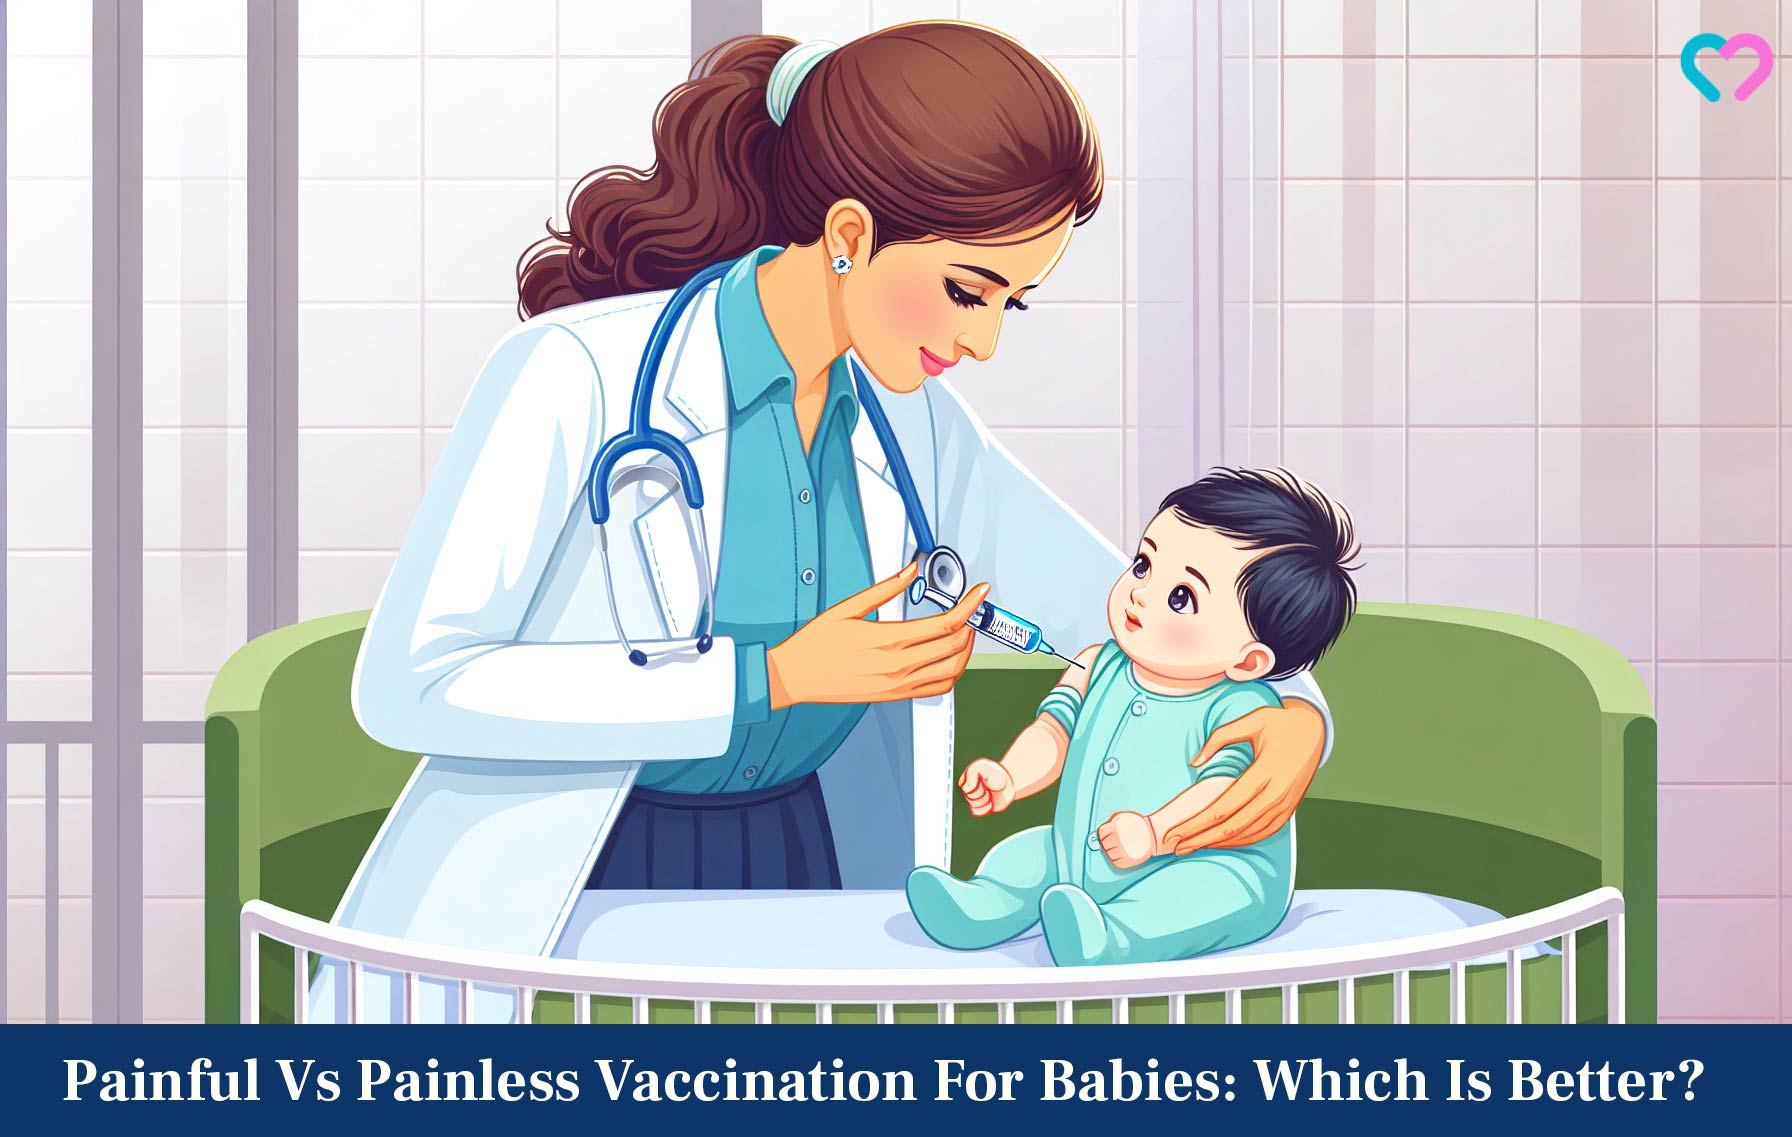 Painful Vs Painless Vaccination For Babies: Which Is Better?_illustration